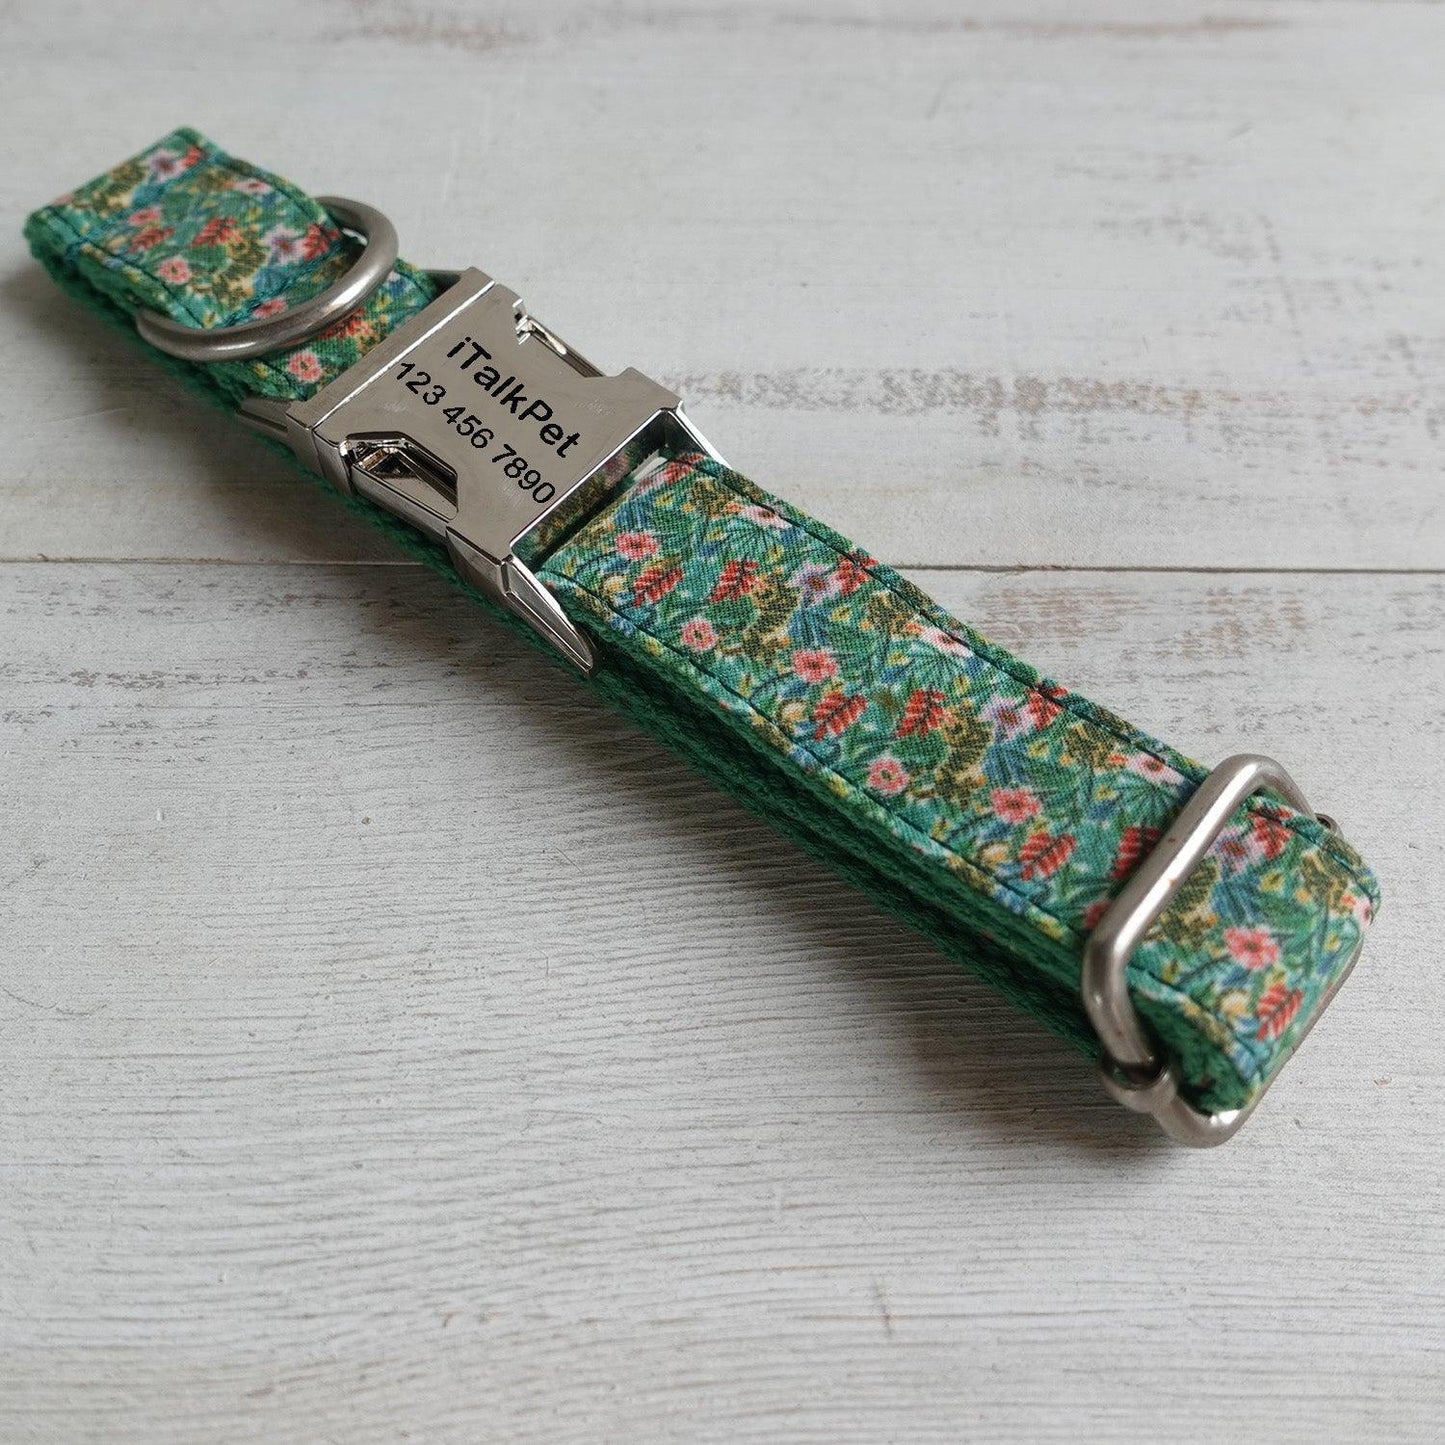 Colorful Flower Green Personalized Dog Collar Set - iTalkPet